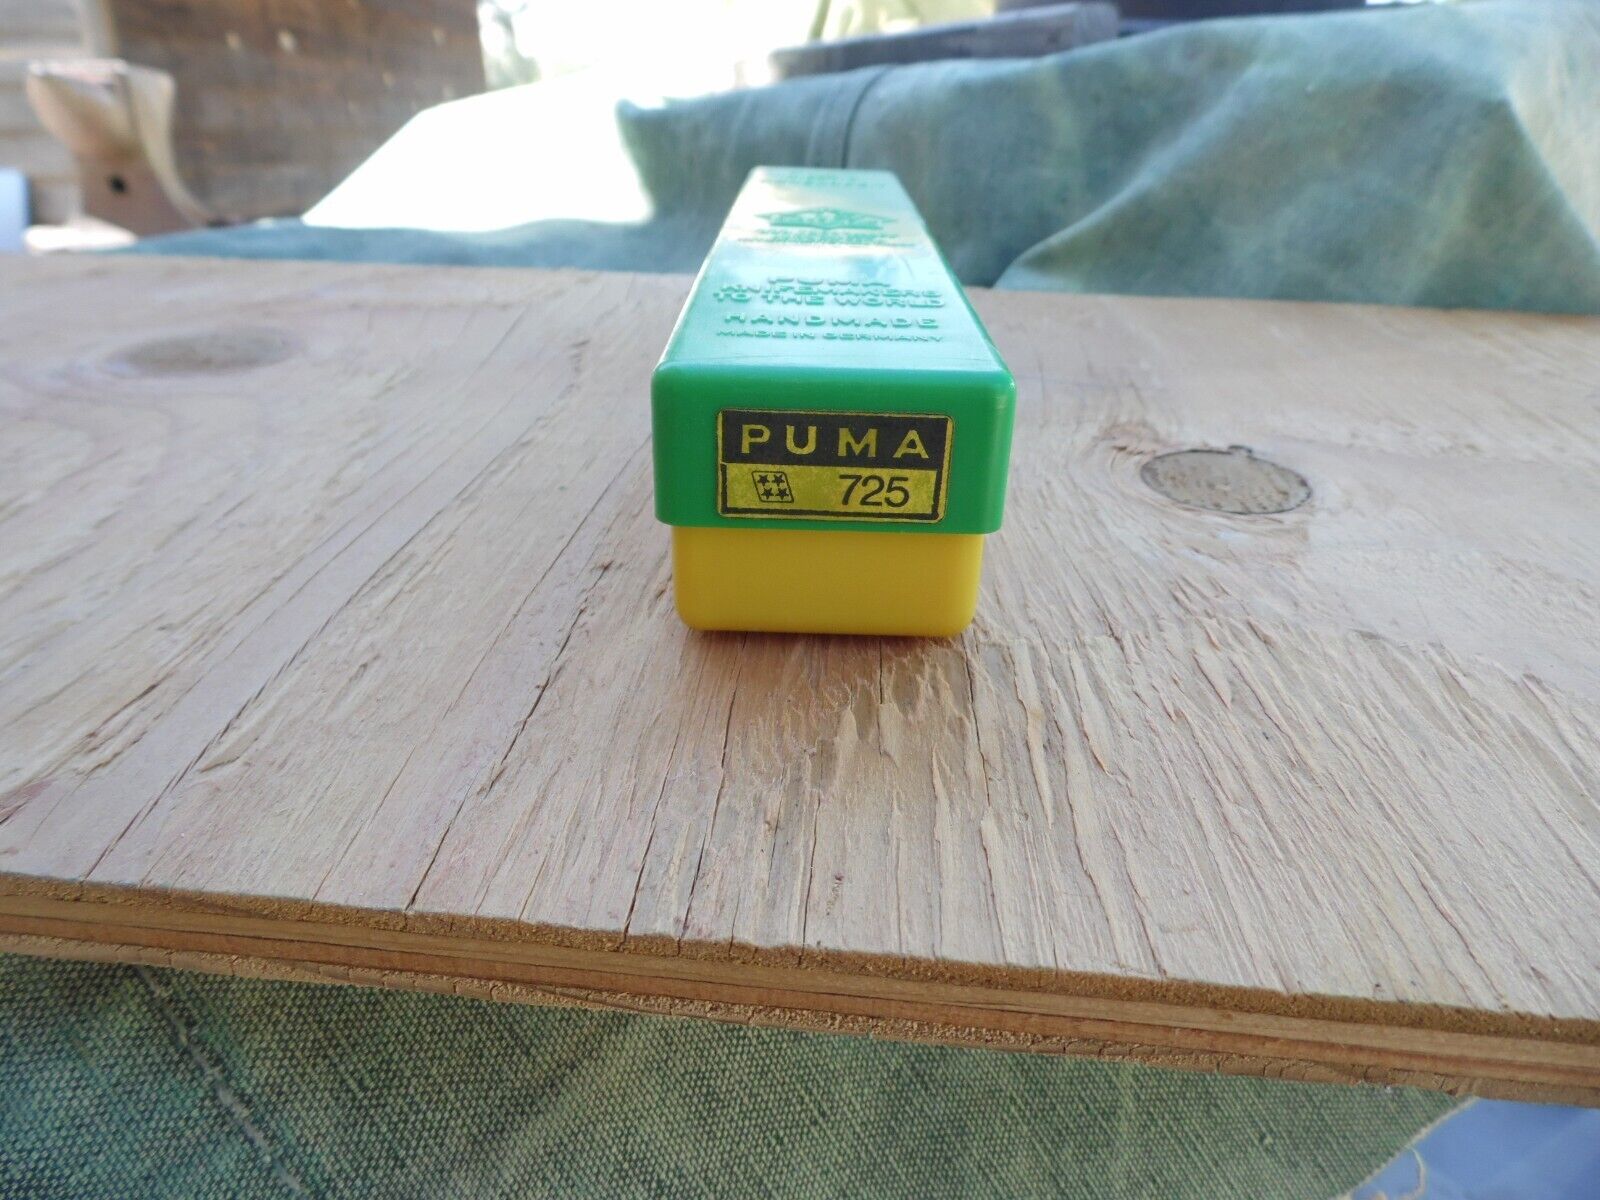 Puma knife boxes, green and yellow, for 725, and 6393 SKINNER. 2 boxes ONLY.